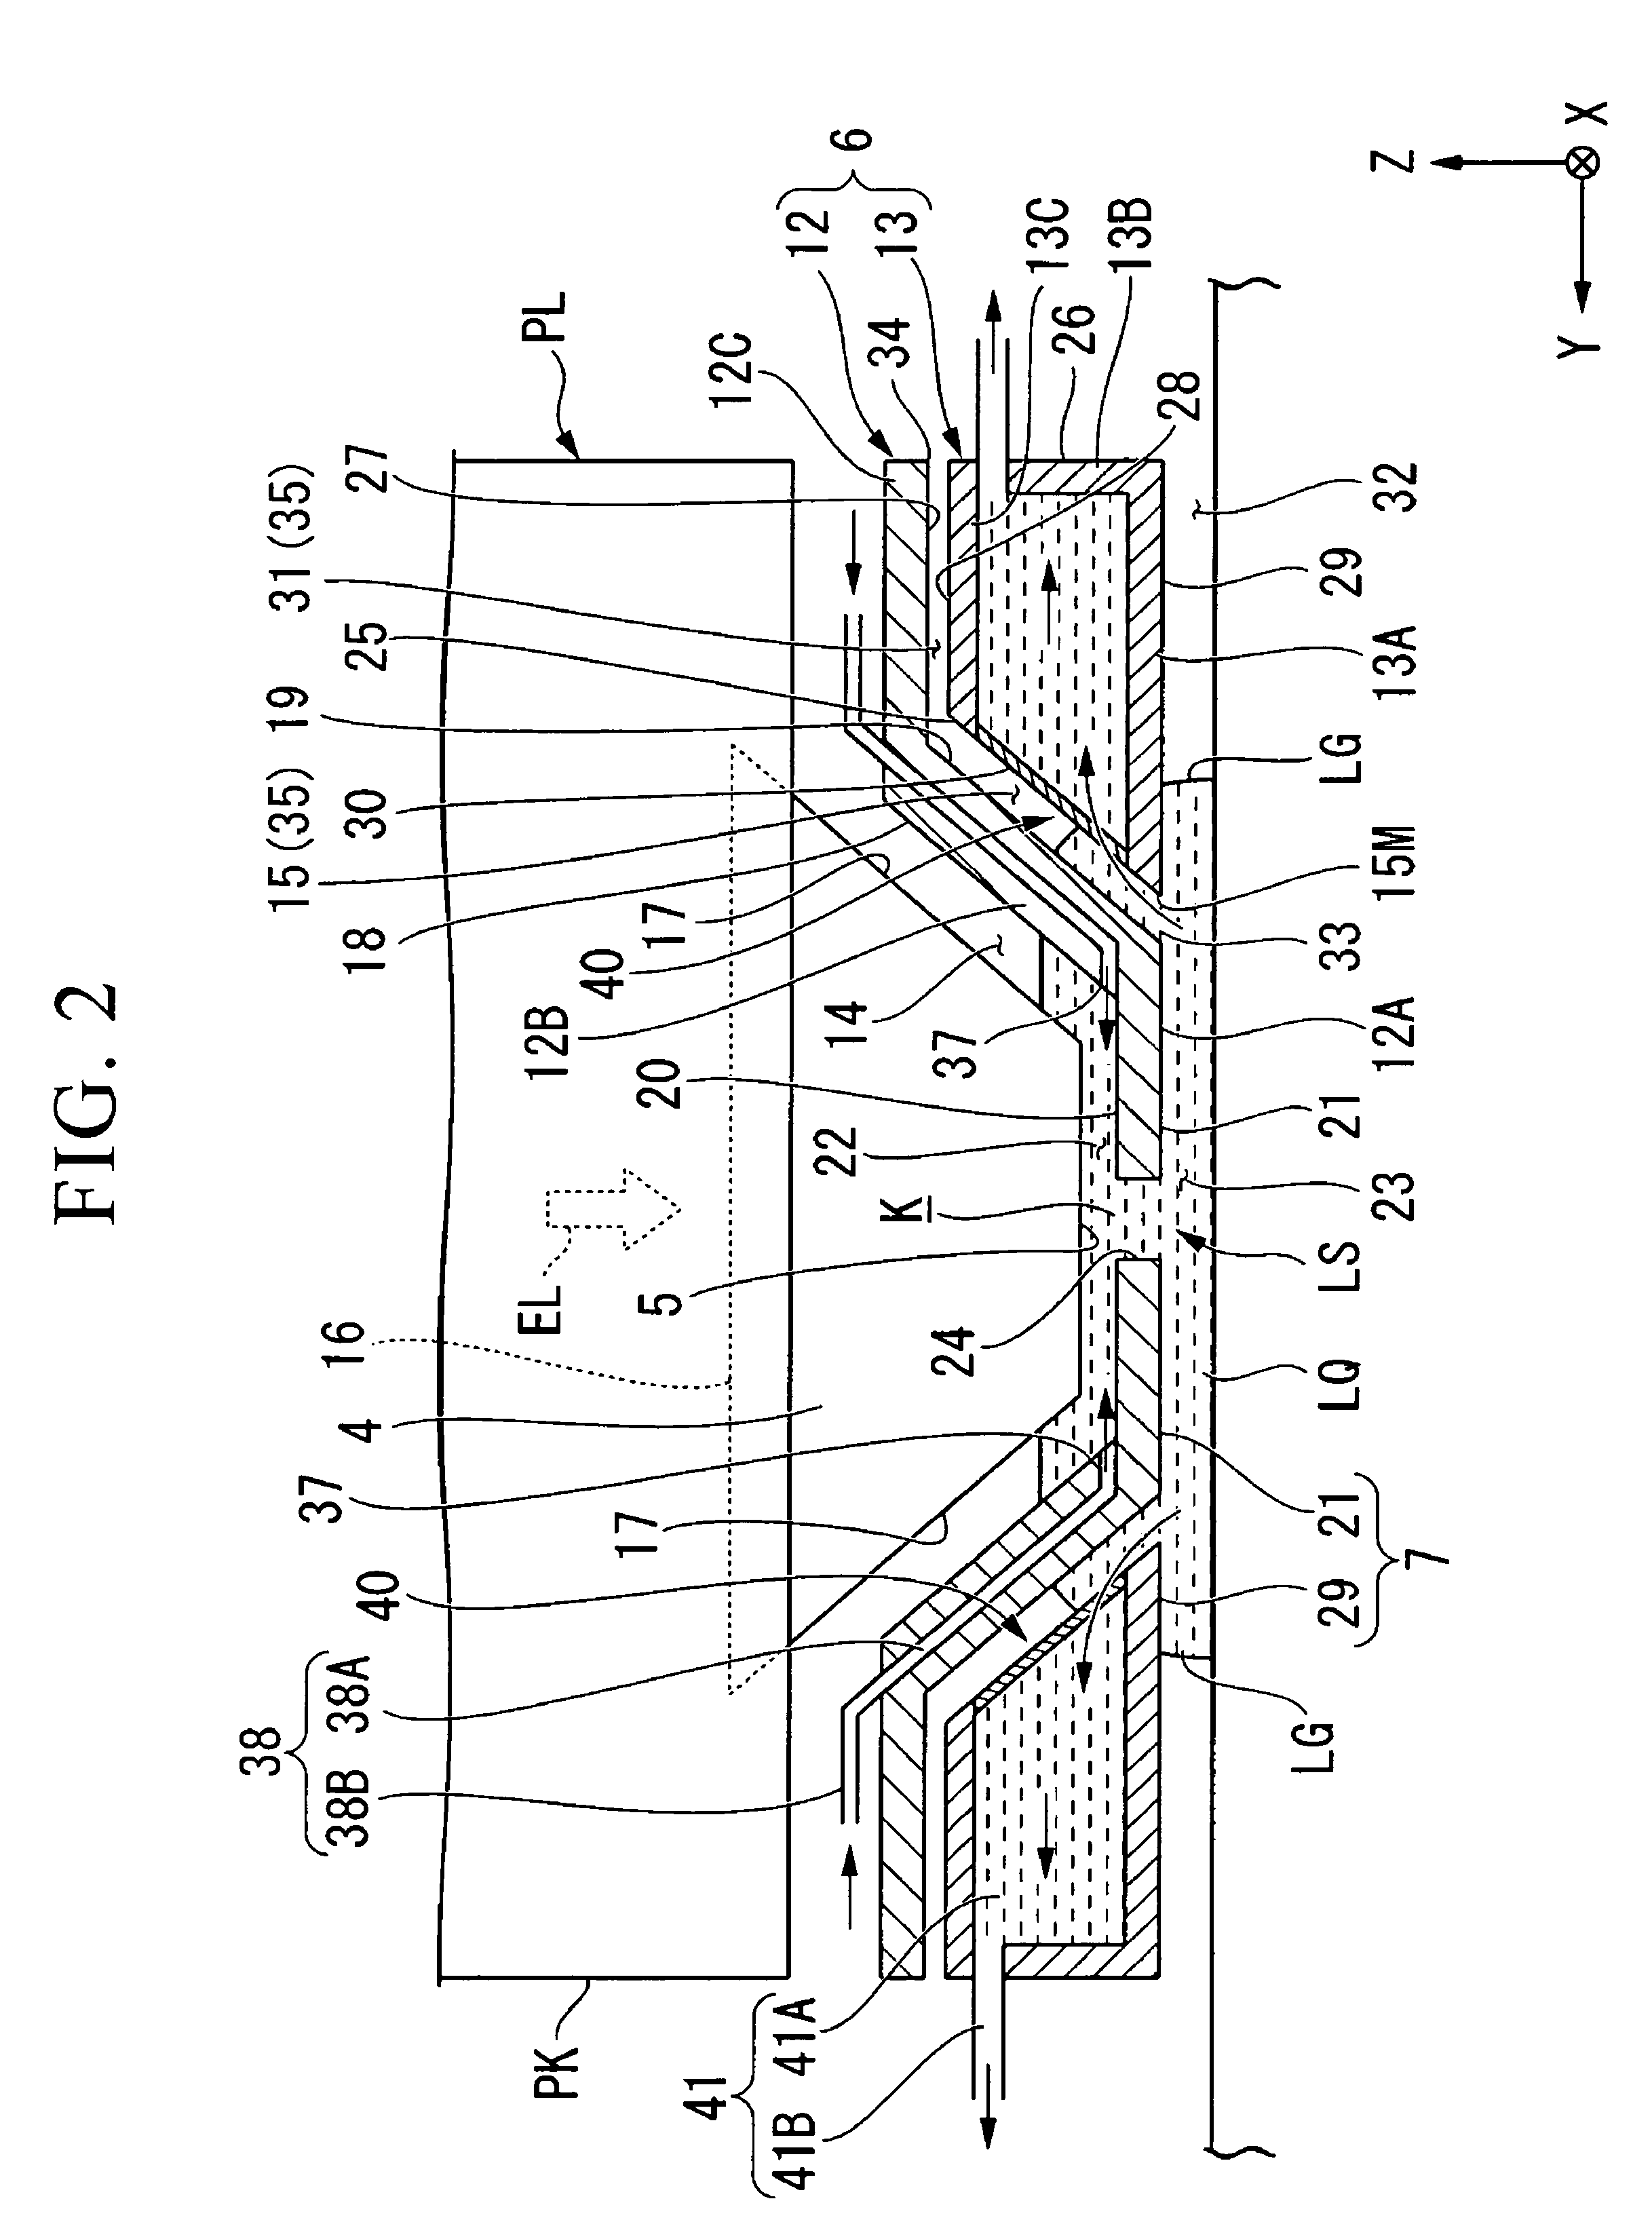 Liquid recovery system, immersion exposure apparatus, immersion exposing method, and device fabricating method